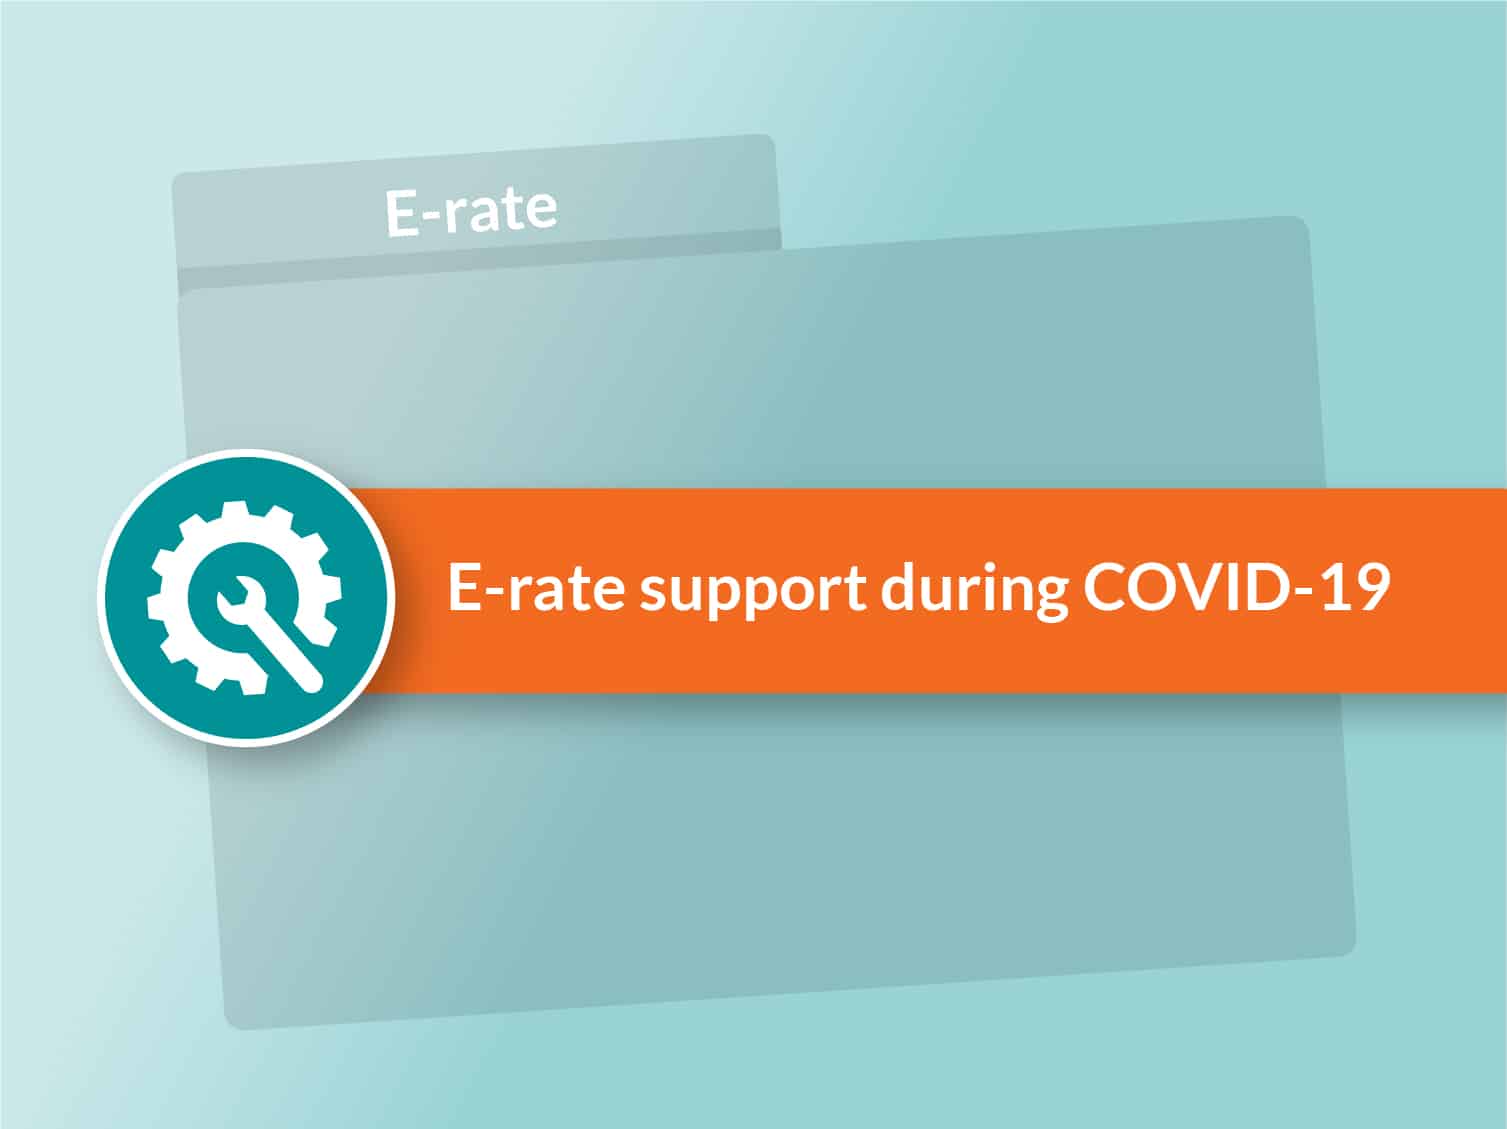 E-rate support during COVID-19